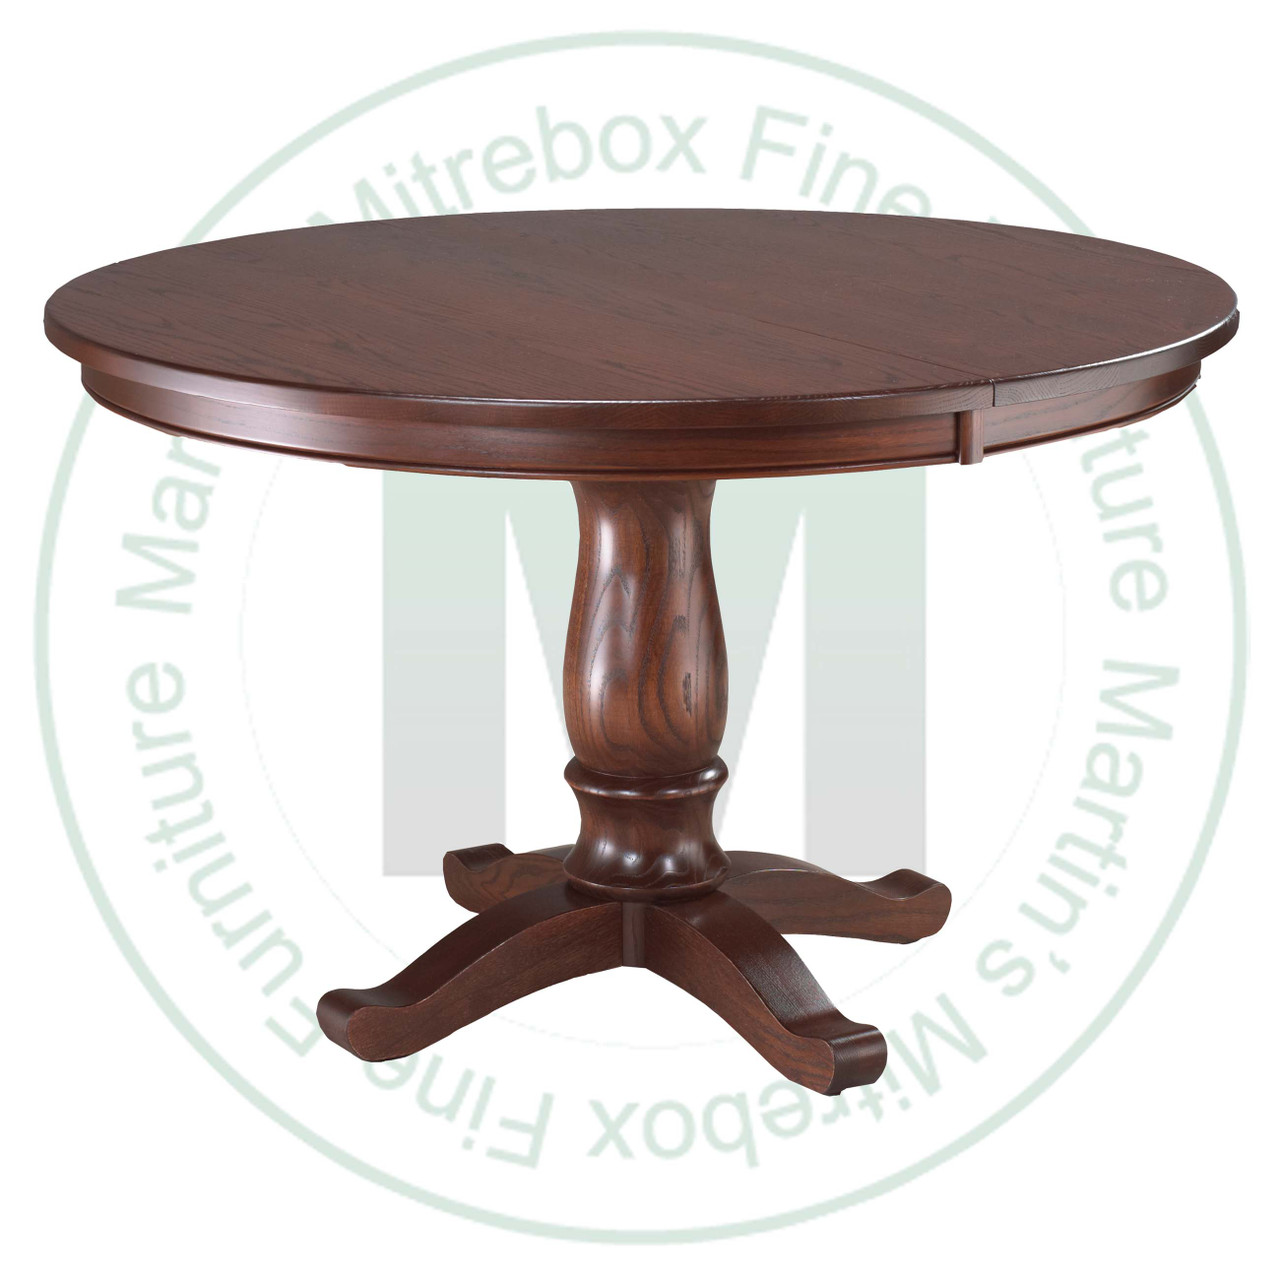 Maple Kimberly Crest Single Pedestal Table 48''D x 54''W x 30''H Round Solid Table